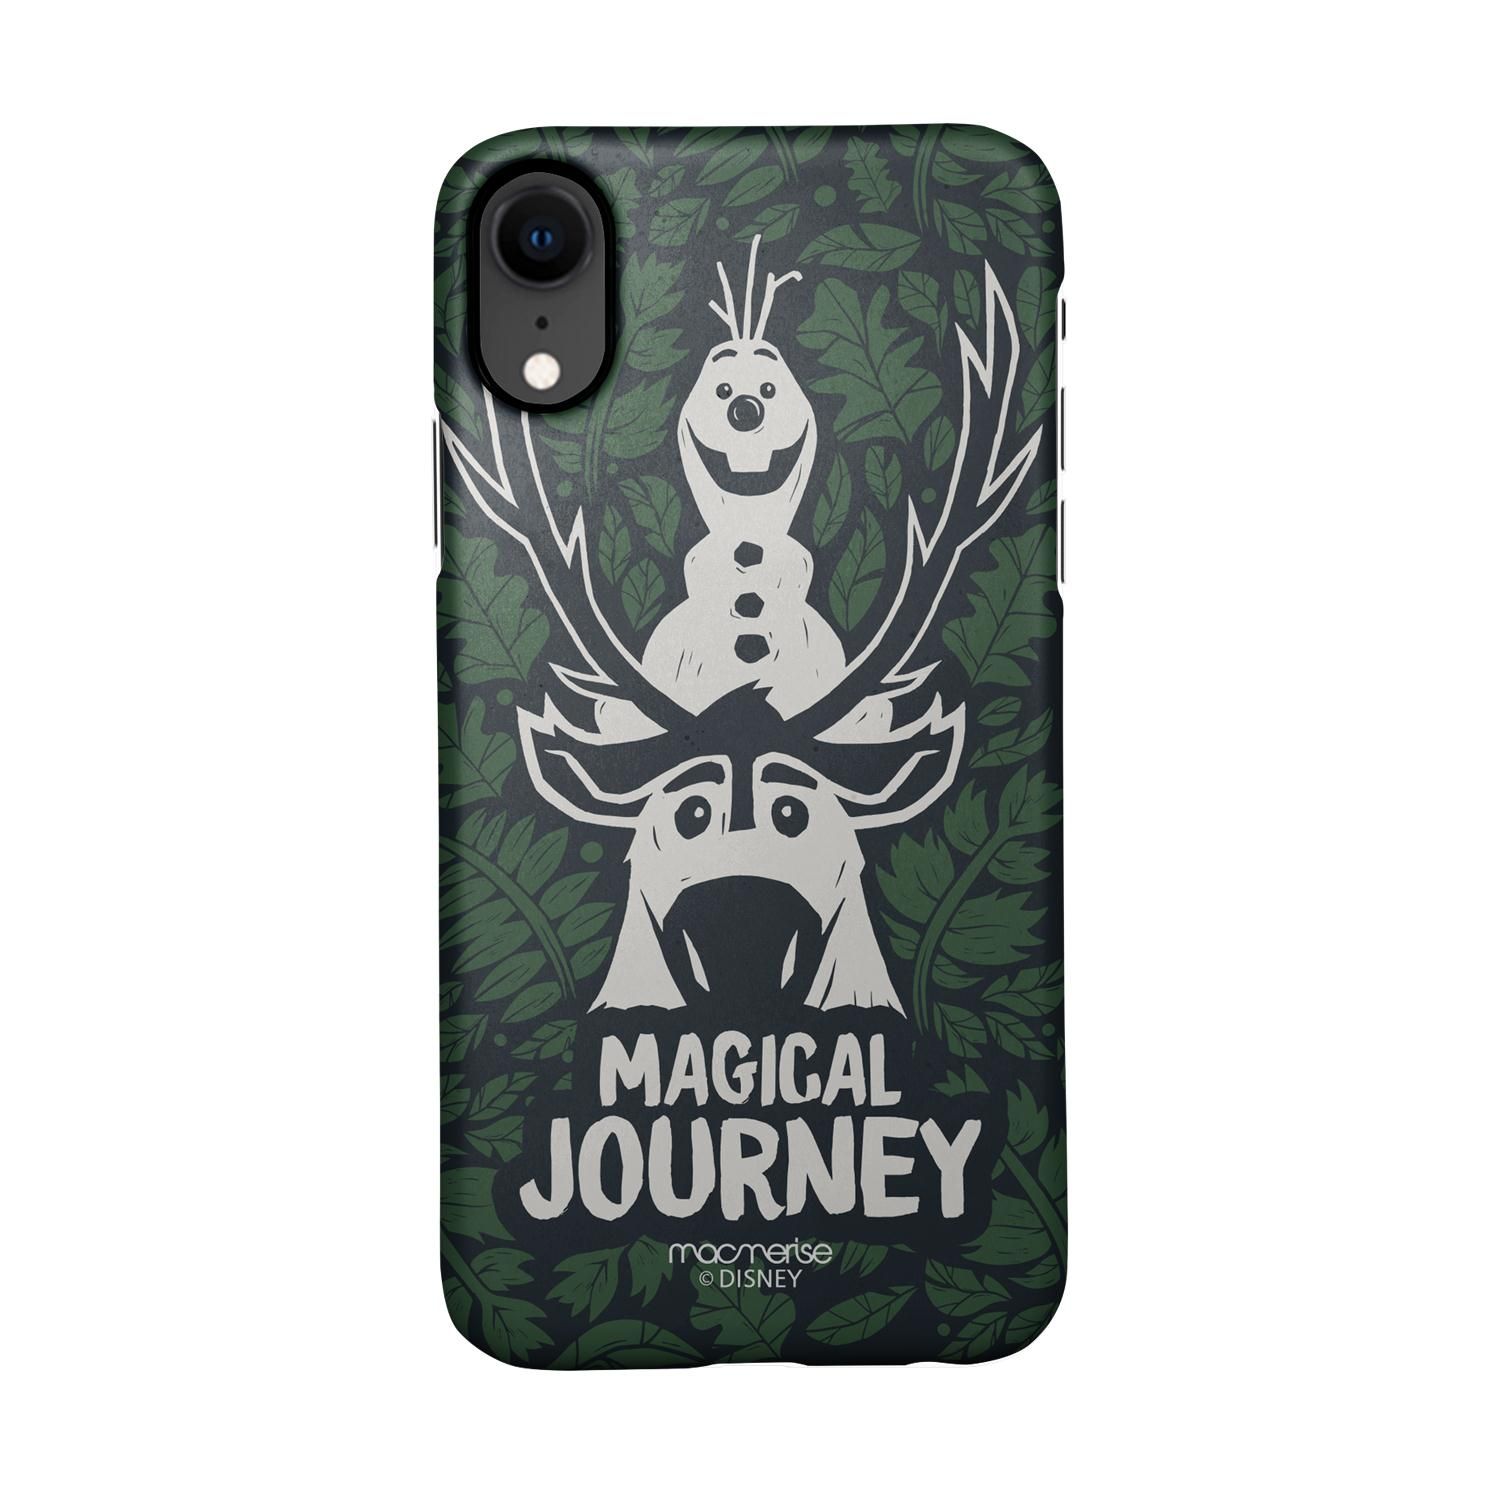 Buy Magical Journey - Sleek Phone Case for iPhone XR Online